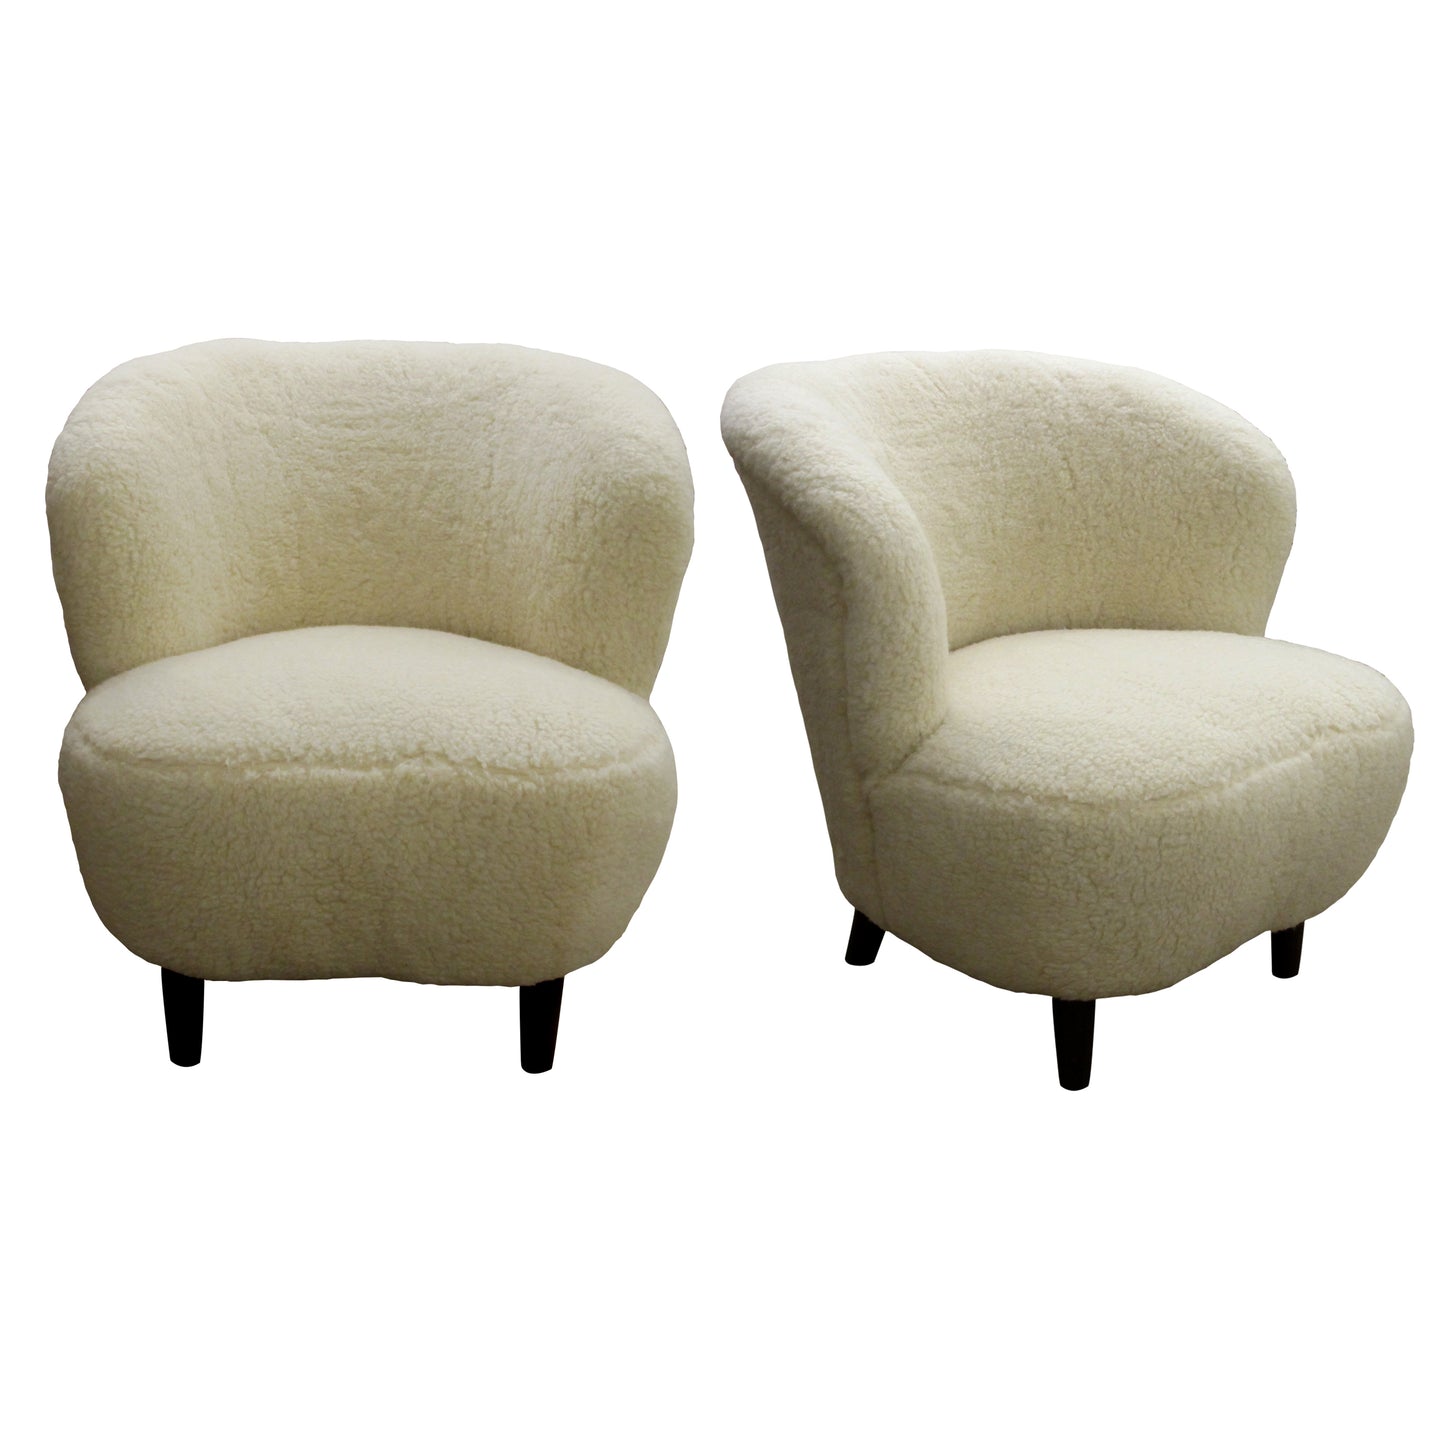 1940’s Finish Pair Of Lounge Armchairs Upholstered With A Lamb Mix Fabric